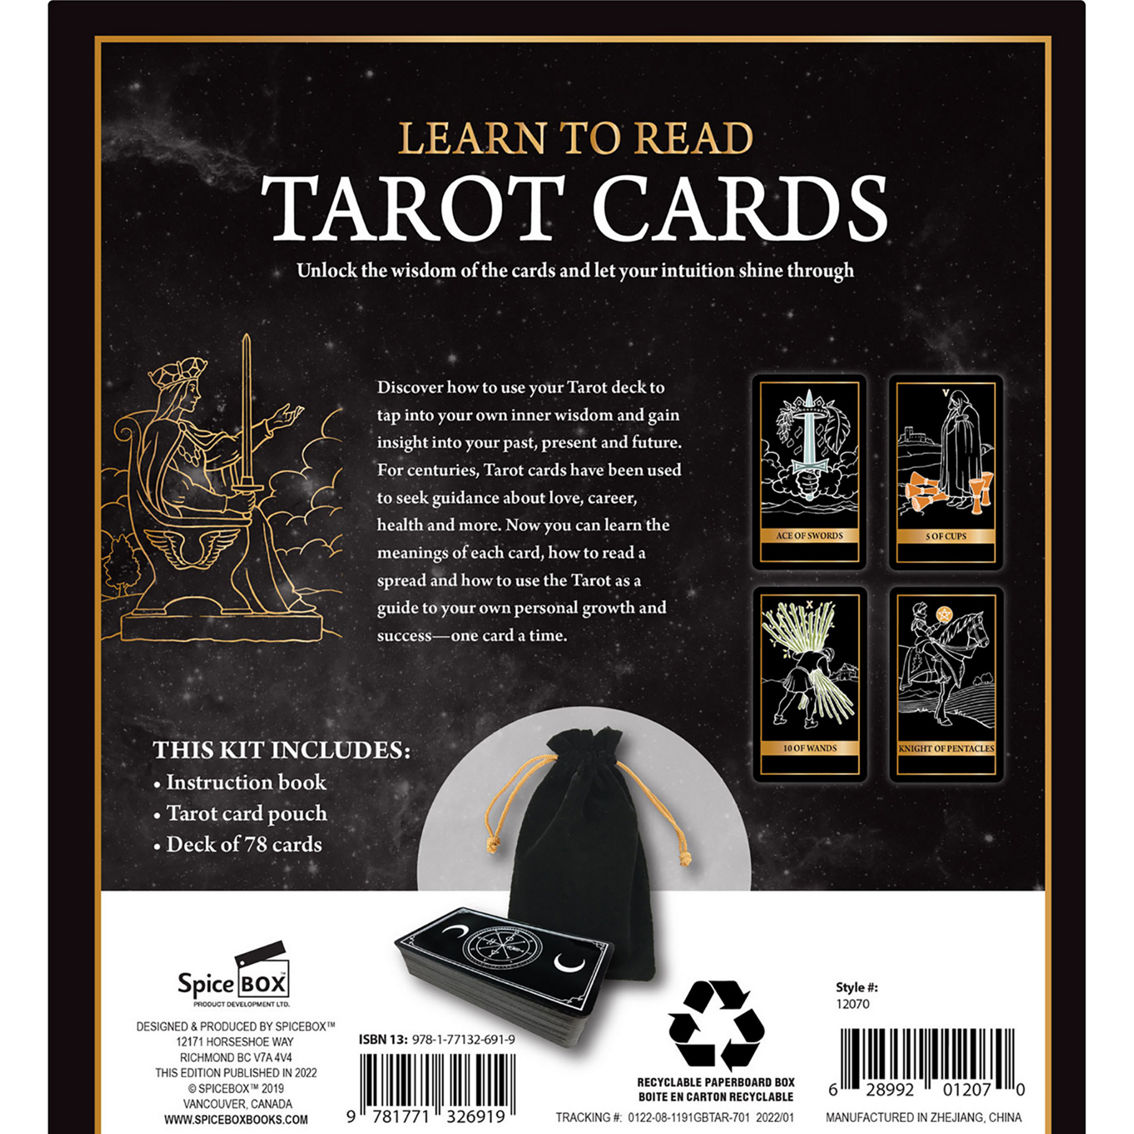 SpiceBox Gift Box: Tarot Cards - Image 2 of 7